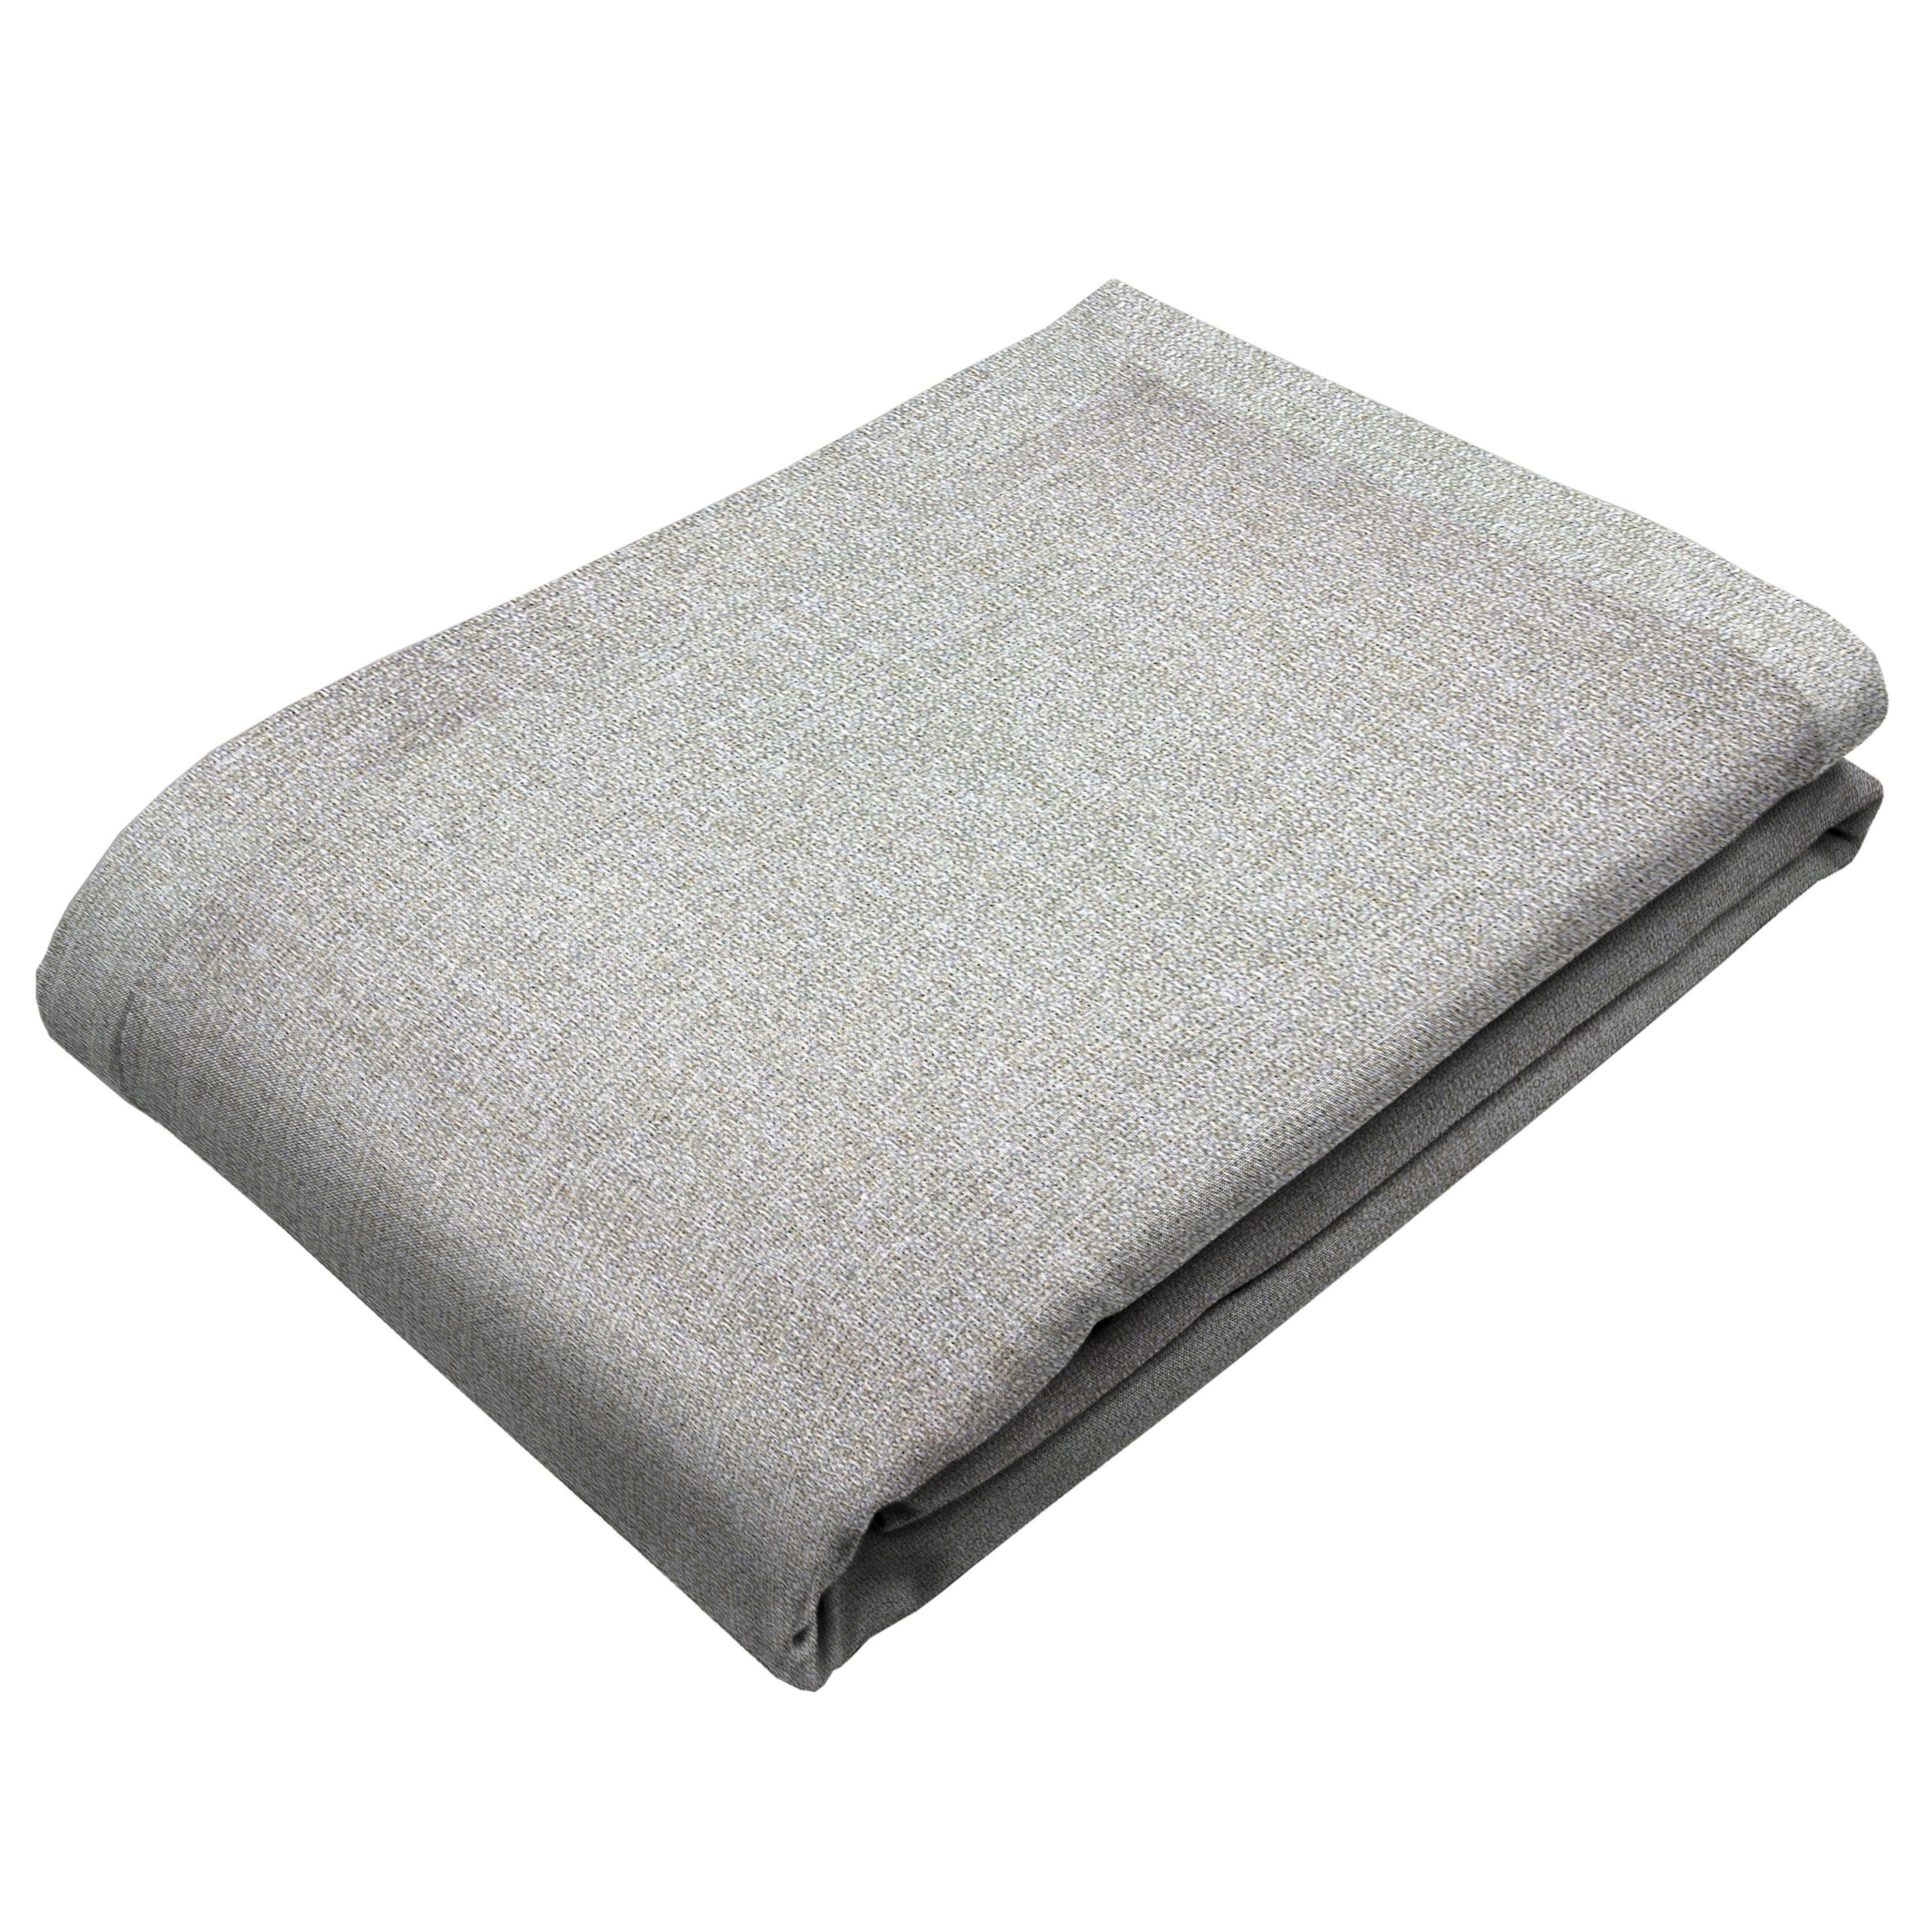 Highlands Natural Throws & Runners, Bed Runner (50cm x 165cm)